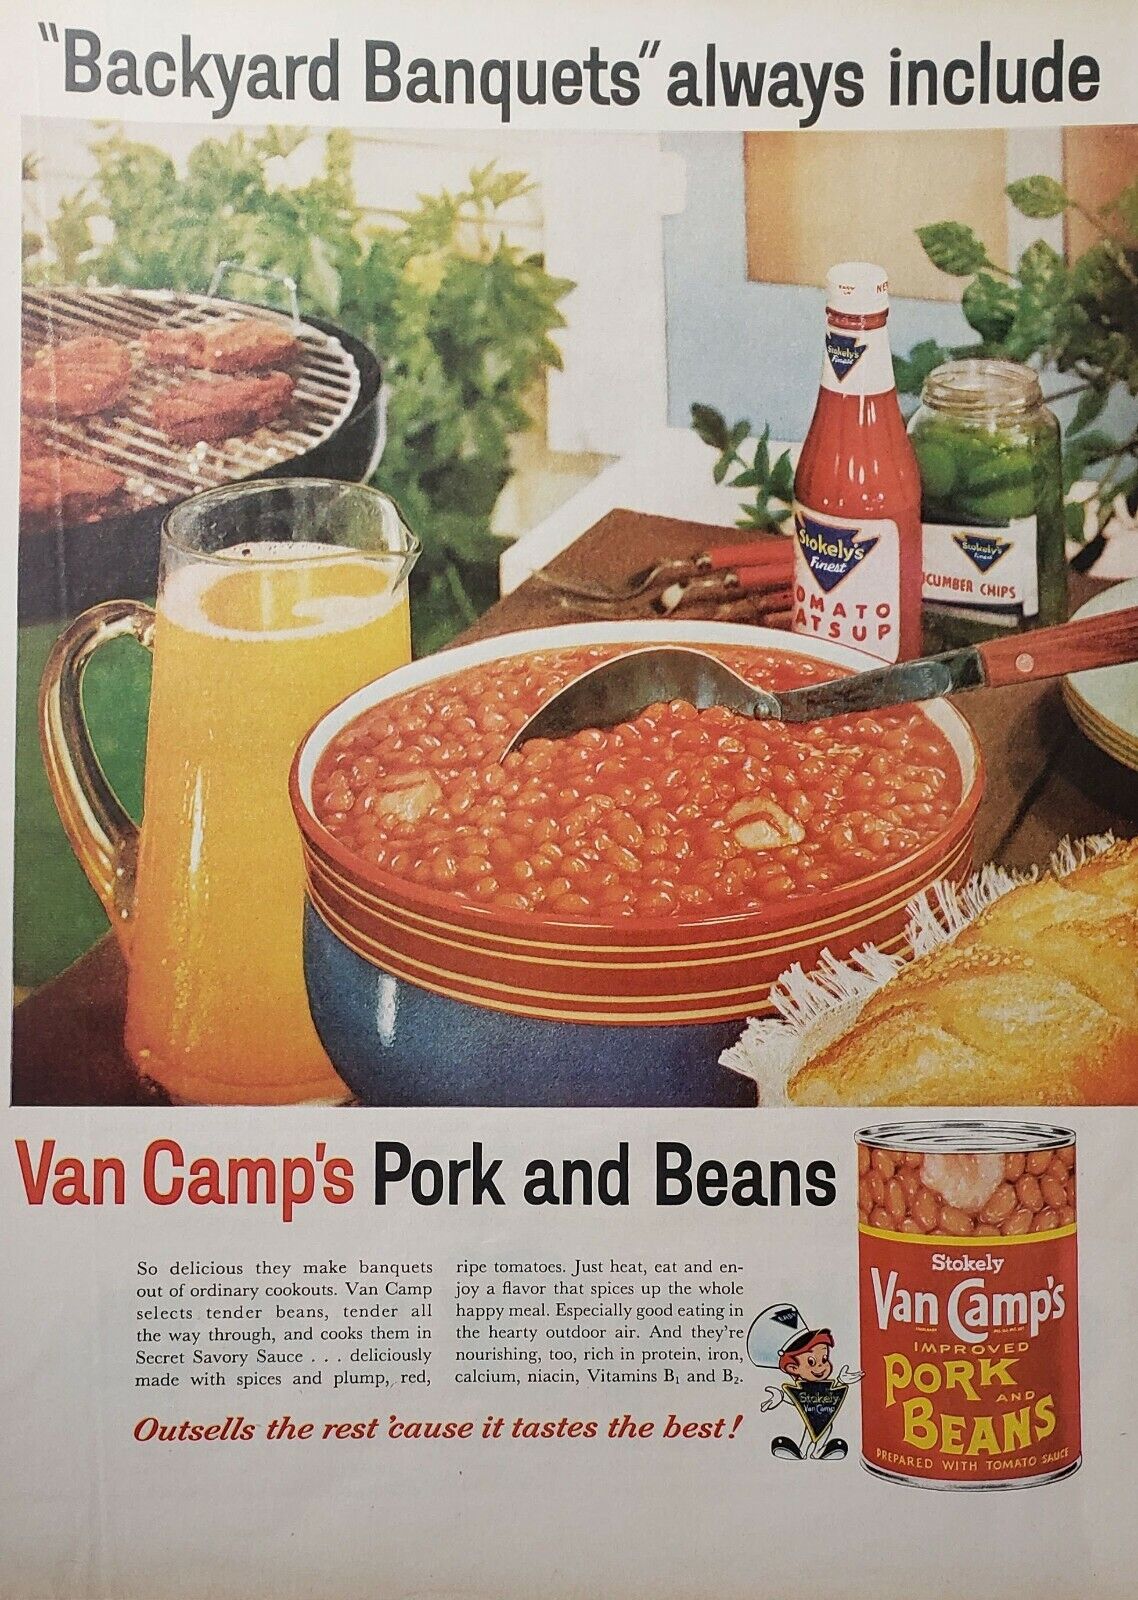 Lot of 3 Vintage 1960 Stokely Van Camps Baked Beans Print Ads 